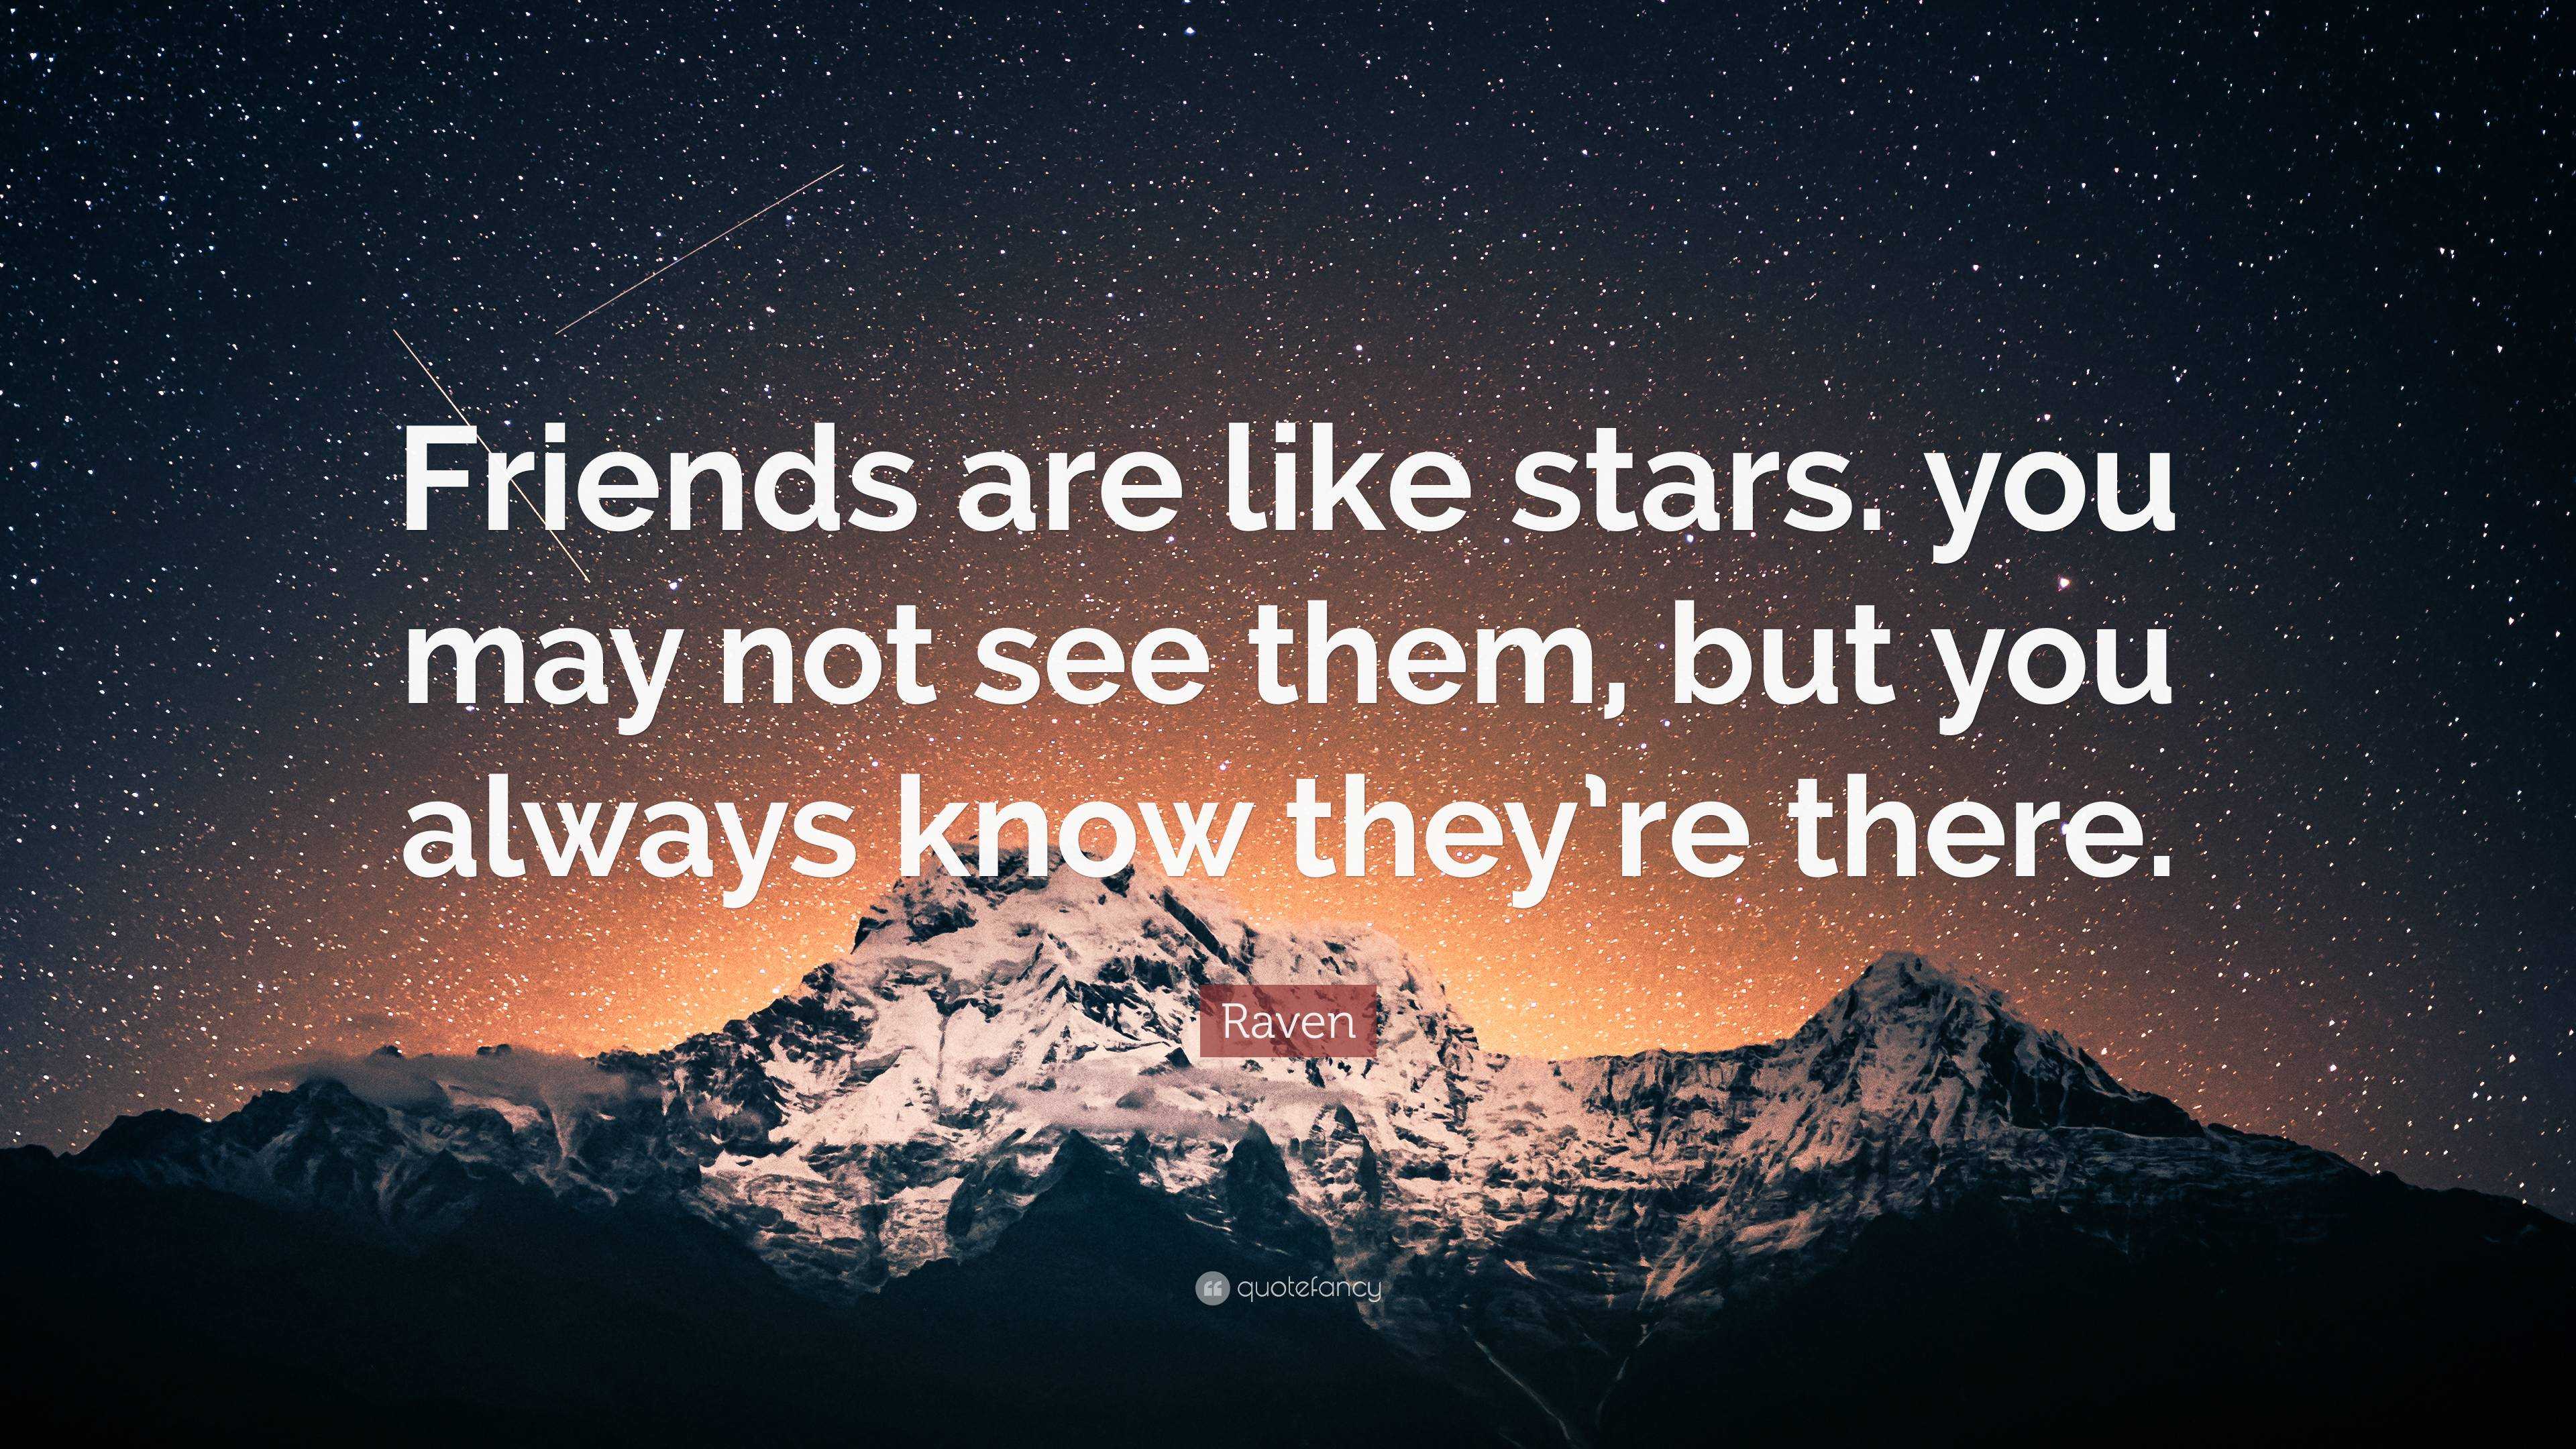 Raven Quote Friends Are Like Stars You May Not See Them But You Always Know They